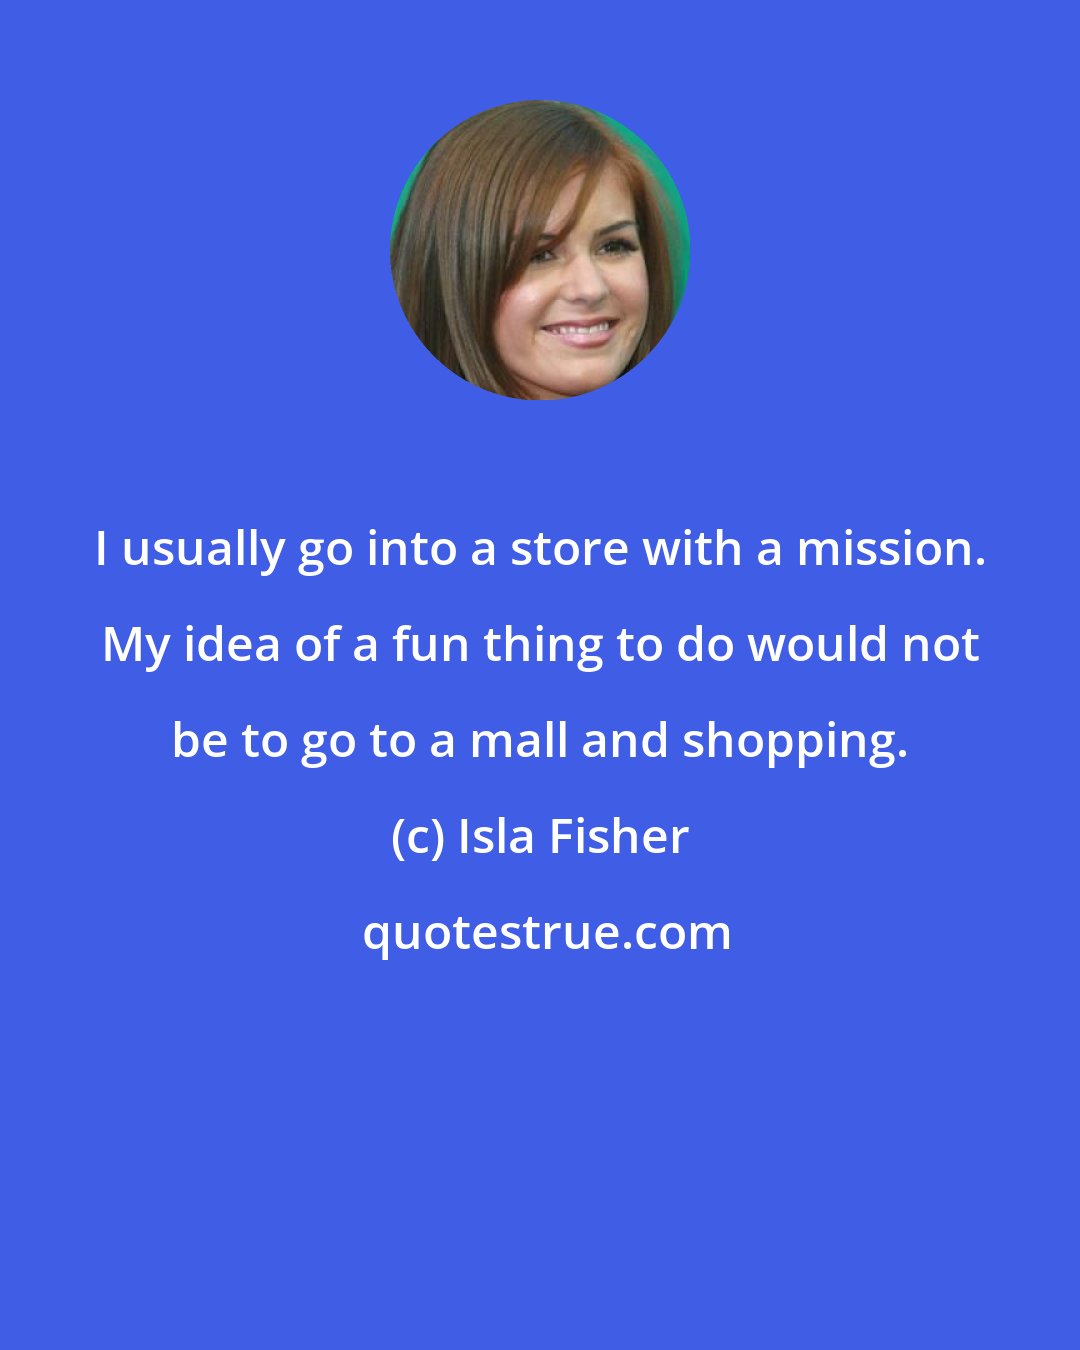 Isla Fisher: I usually go into a store with a mission. My idea of a fun thing to do would not be to go to a mall and shopping.